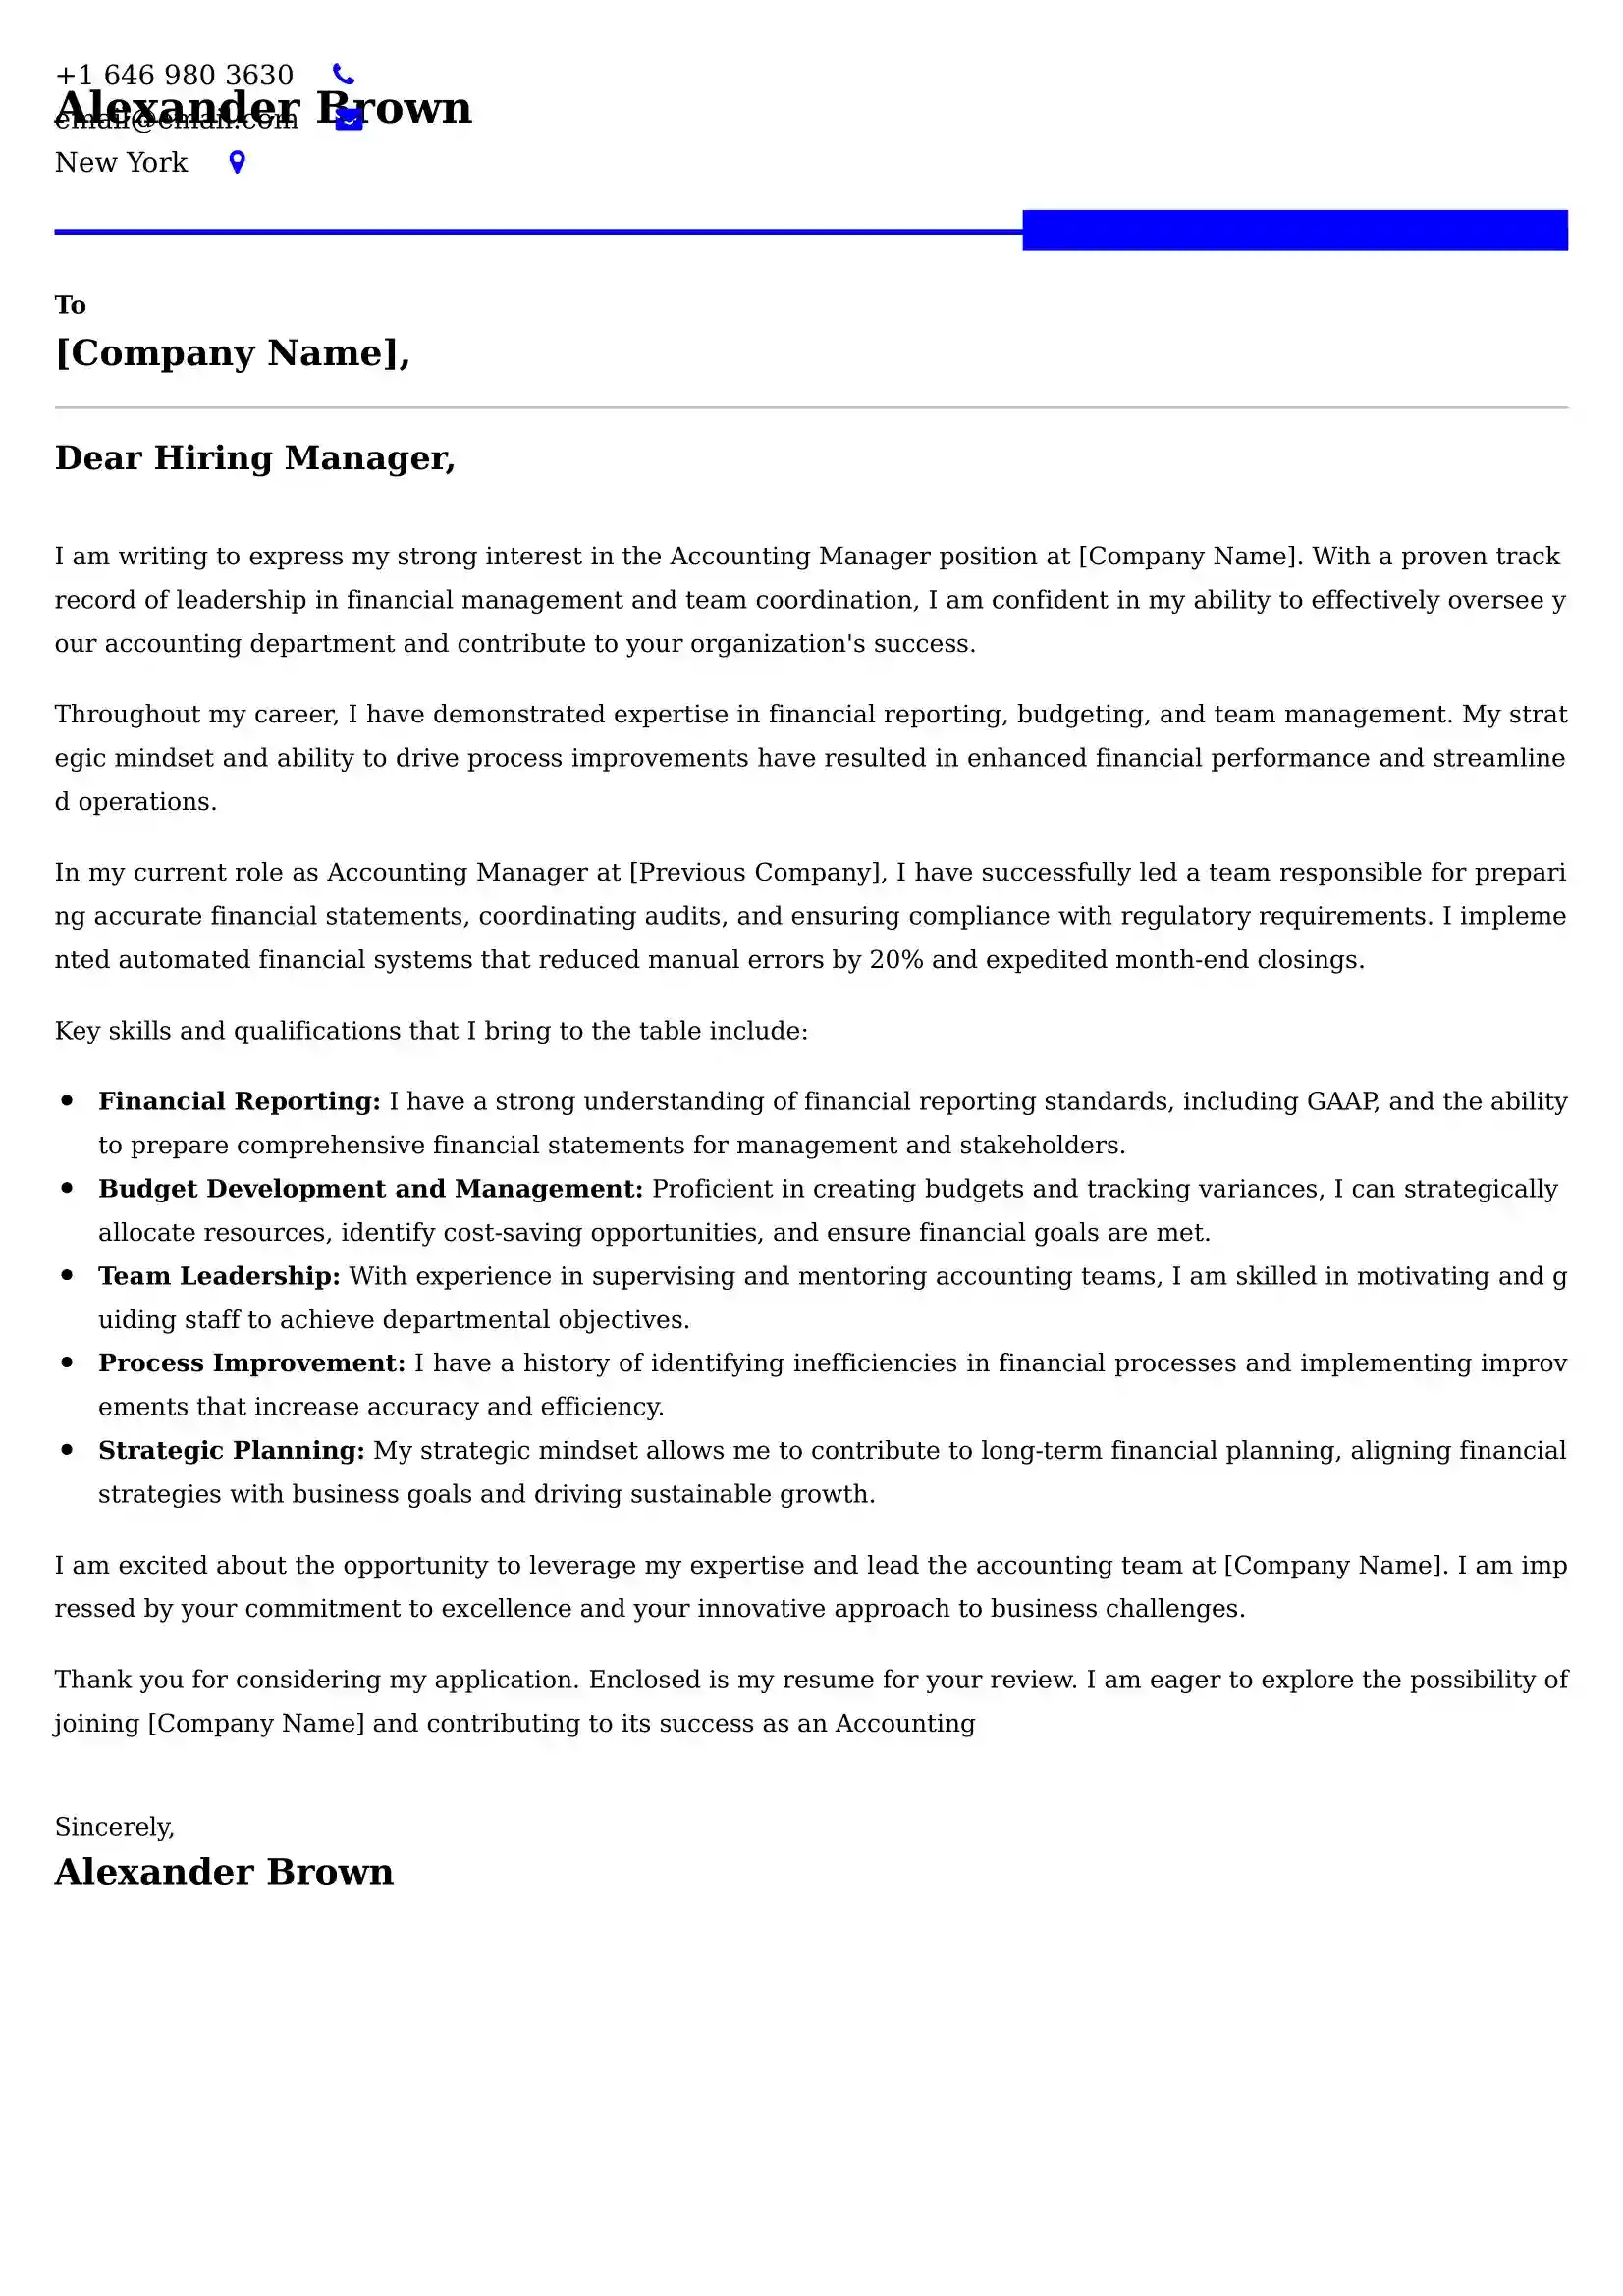 Accounting Manager Cover Letter Examples - Latest UK Format